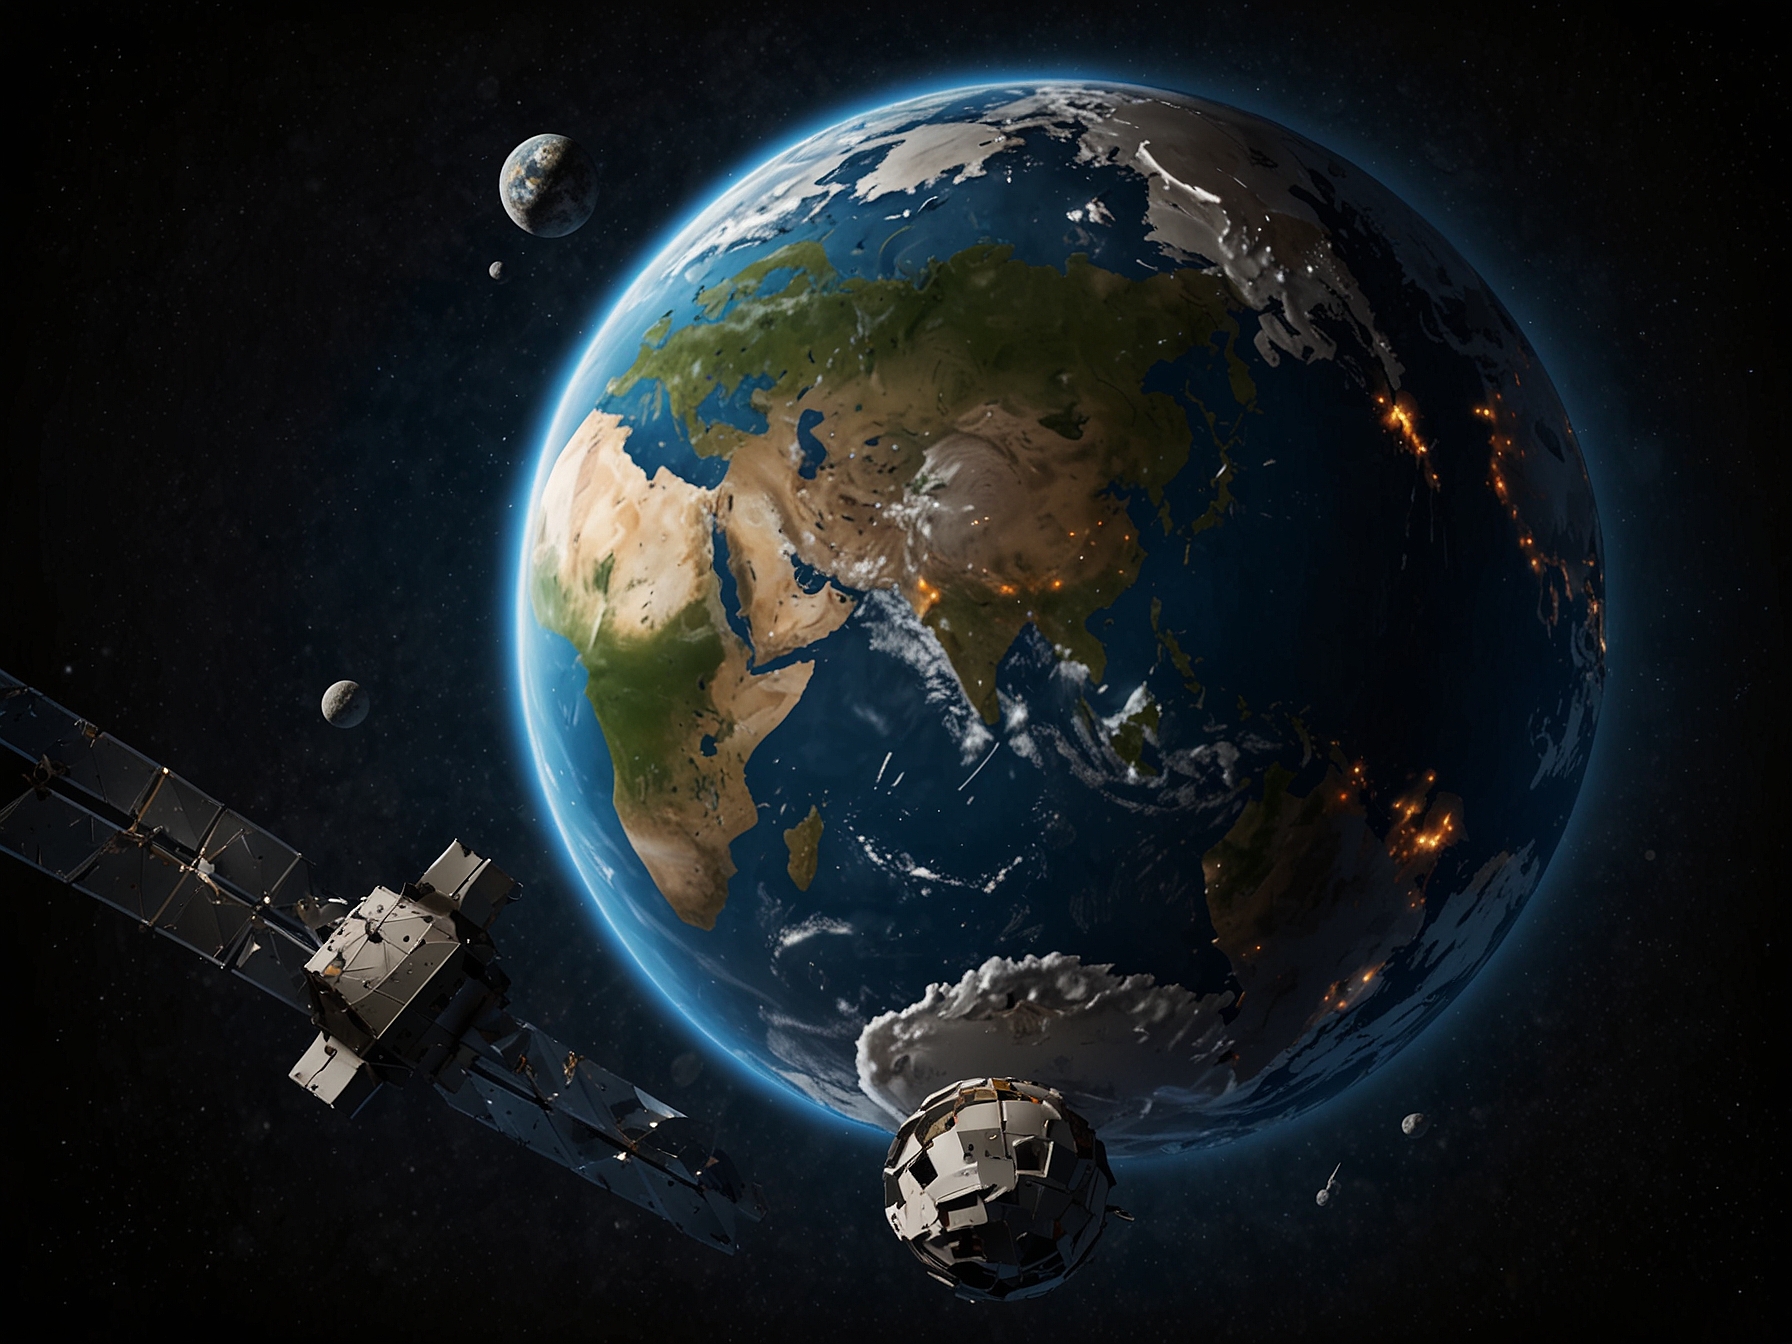 Graphic showing the accumulation of space debris around Earth's orbit, emphasizing the urgency and importance of missions dedicated to cleaning up outer space.